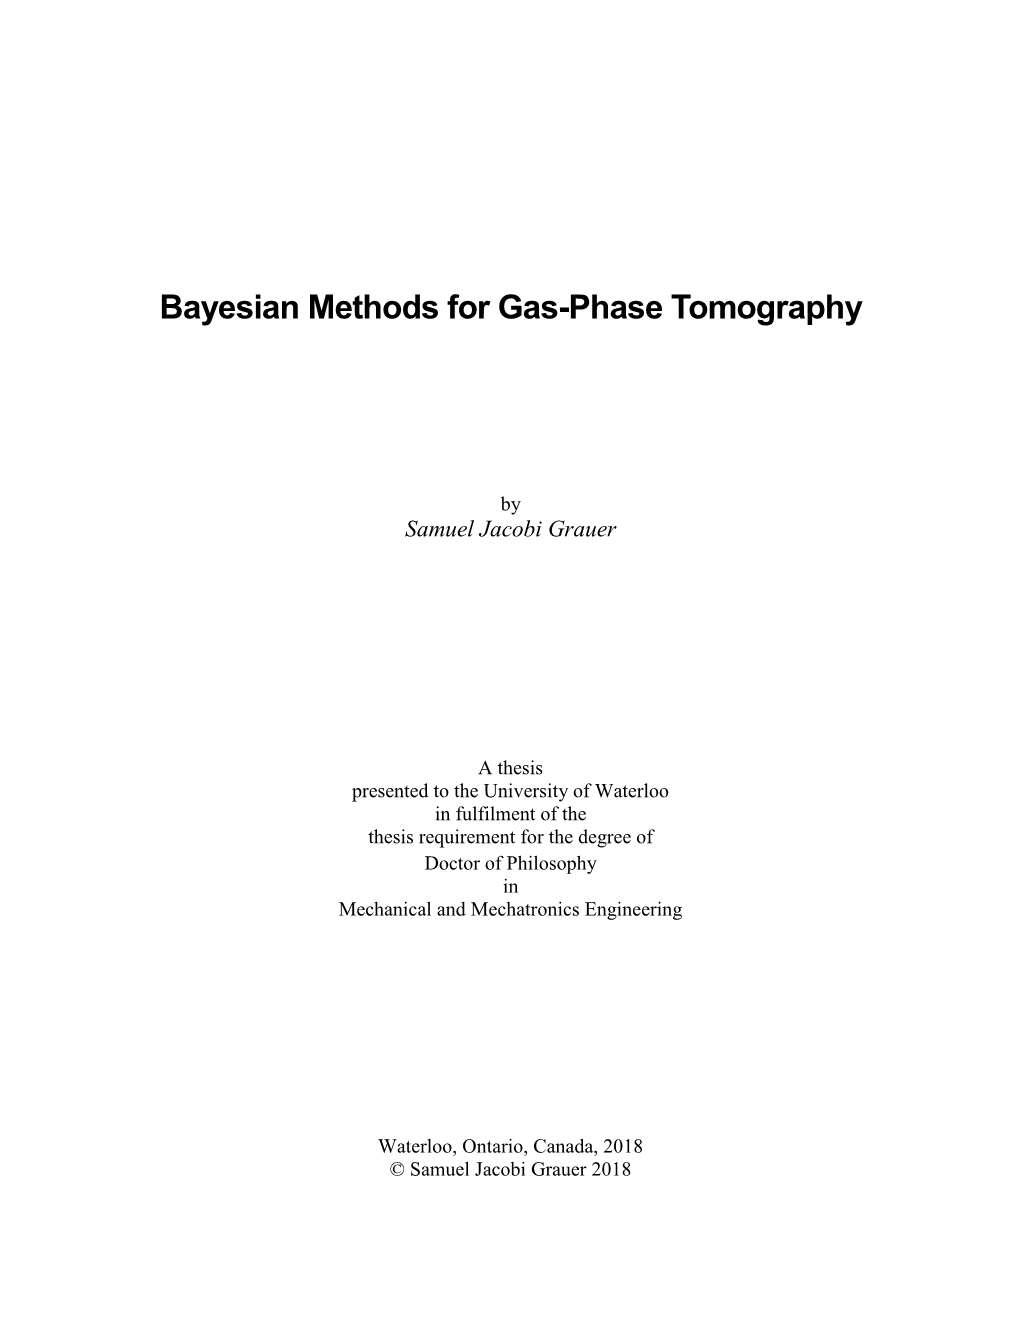 Bayesian Methods for Gas-Phase Tomography